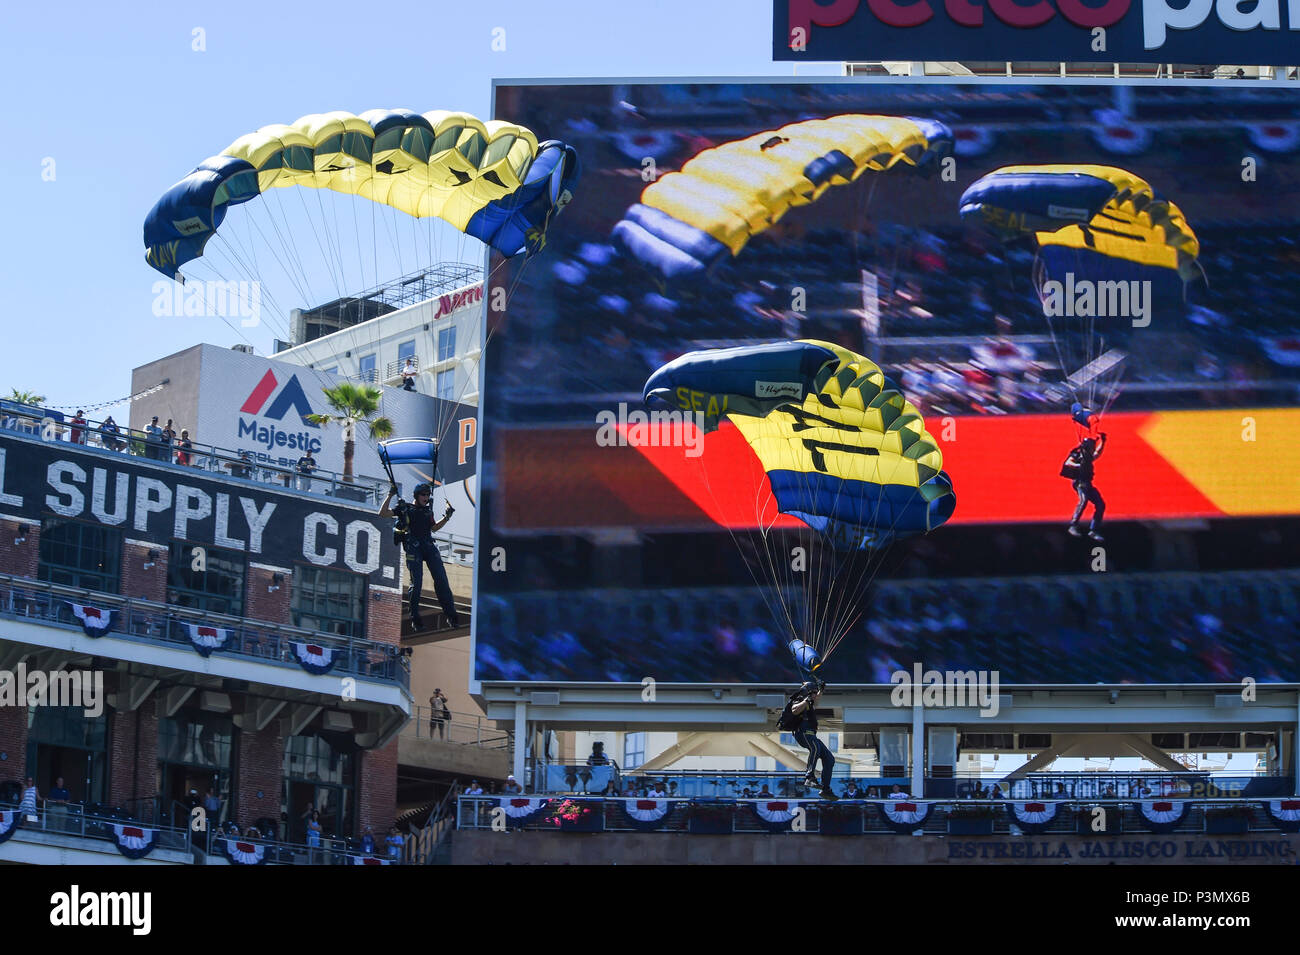 160710-N-VY375-040 SAN DIEGO (July 10, 2016) – Members of the U.S. Navy Parachute Team, the Leap Frogs, prepare to land during a demonstration at the Major League Baseball All-Star Futures Game above Petco Park. The Navy Parachute Team is based in San Diego and performs aerial parachute demonstrations around the nation in support of Naval Special Warfare and Navy recruiting. (U.S. Navy photo by Special Operator 1st Class Remington Peters/Released) Stock Photo